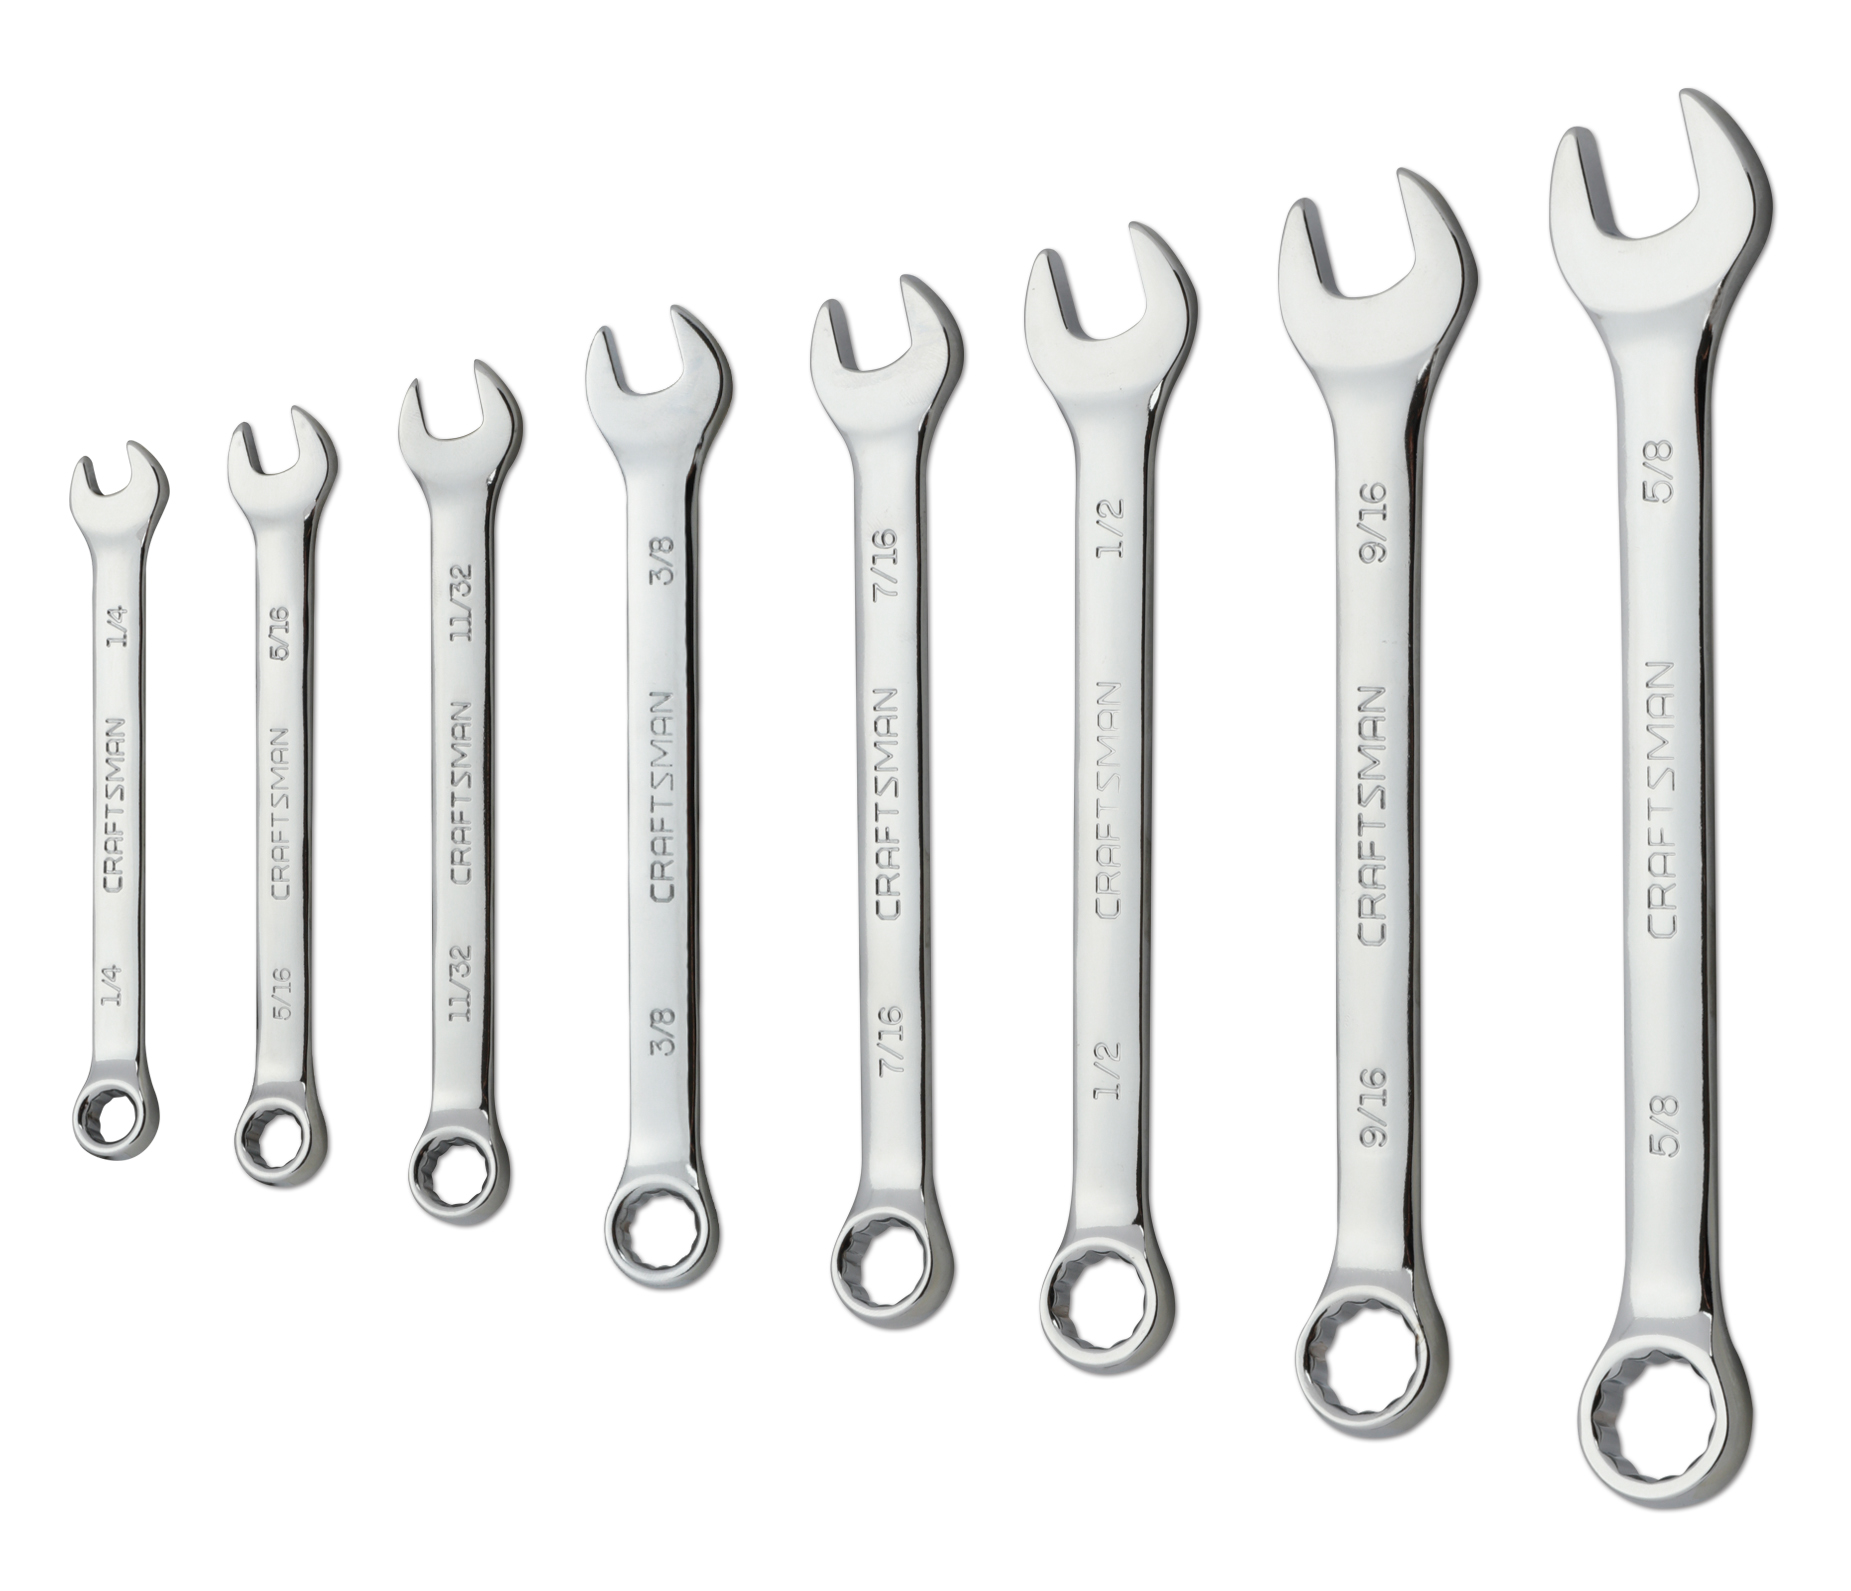 Craftsman 8 Pc. 12-Point Combination Wrench Set